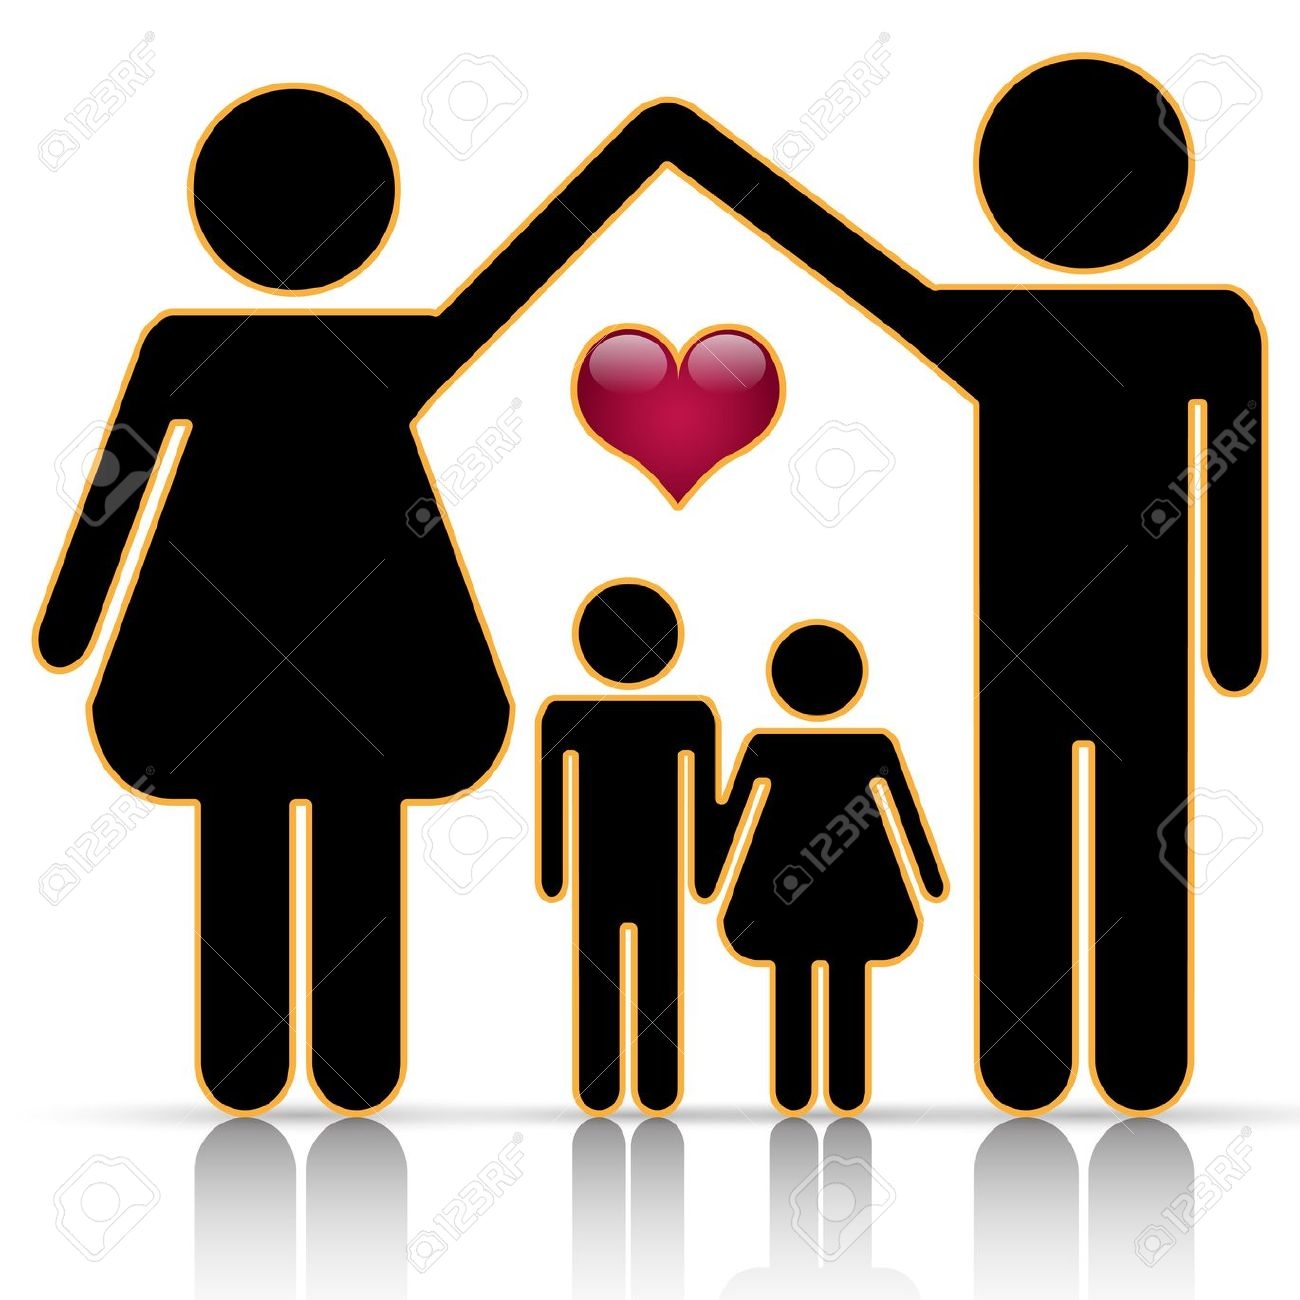 Happy Family Clip Art Free Clipart Images 4 Wikiclipart - Bank2home.com